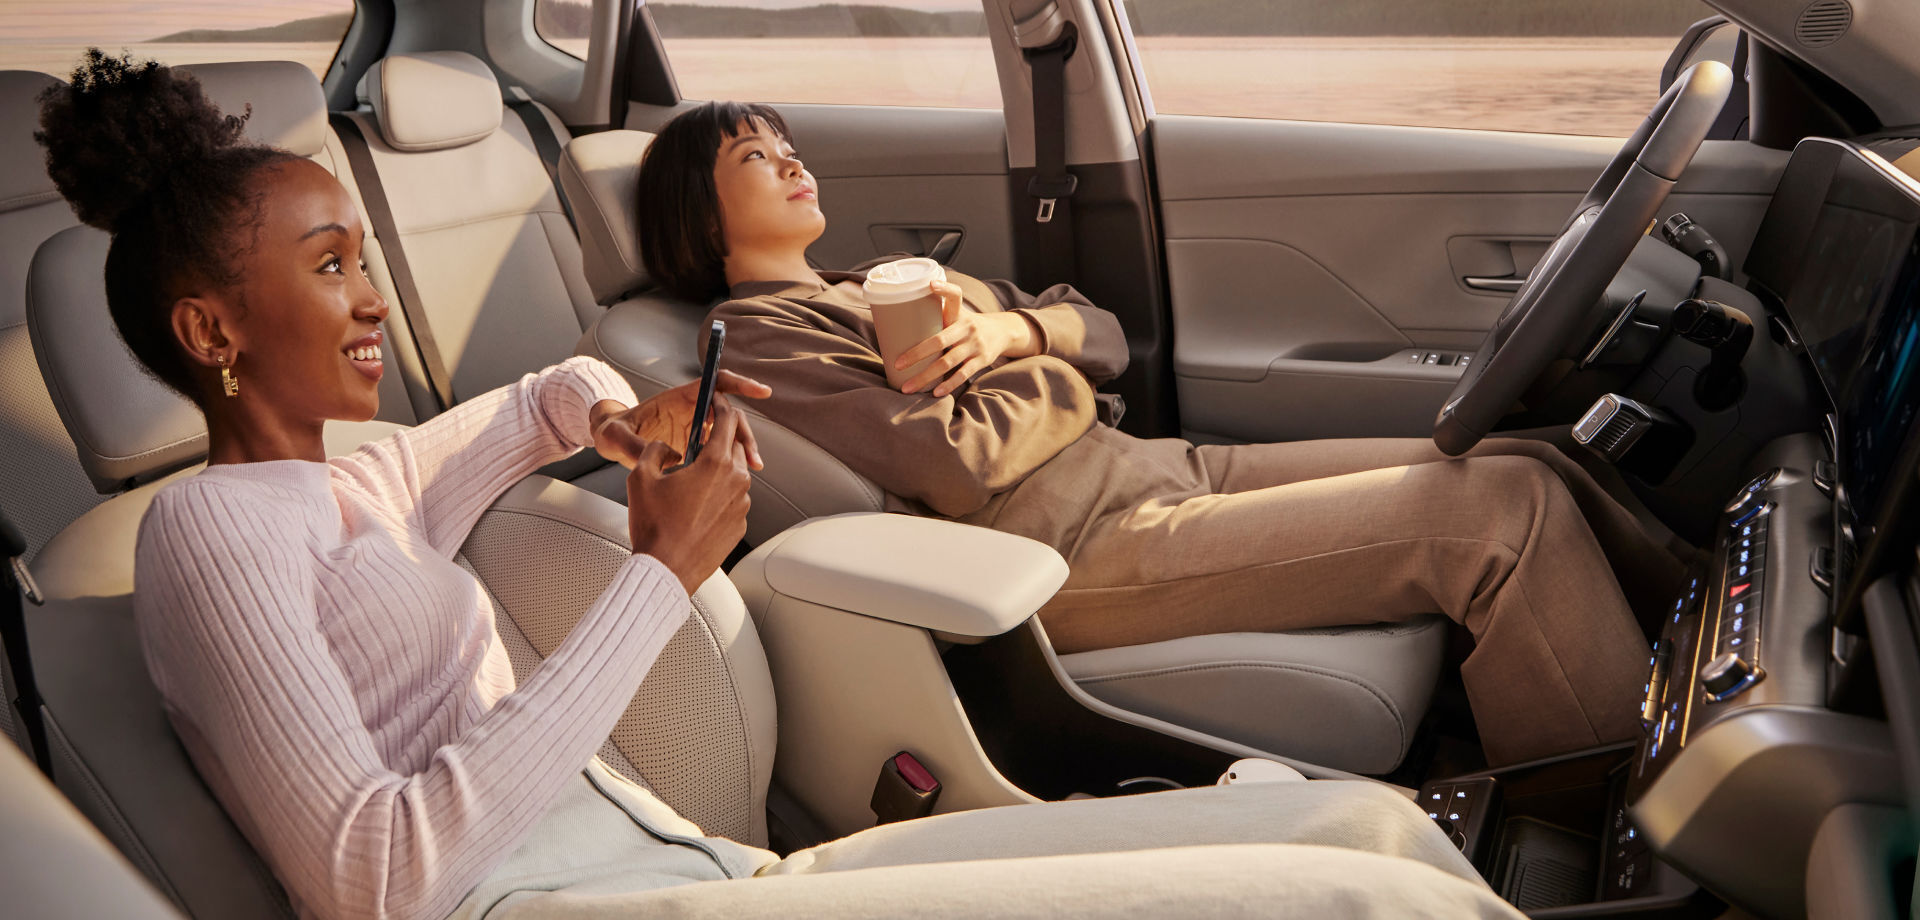 Two women are sitting in the front row of a The all-new KONA with their seats folded back, watching the sunset. The woman in the front passenger seat is holding her smartphone, and the woman in the driver's seat is holding her take-out paper cup in her left hand, with her arms crossed.